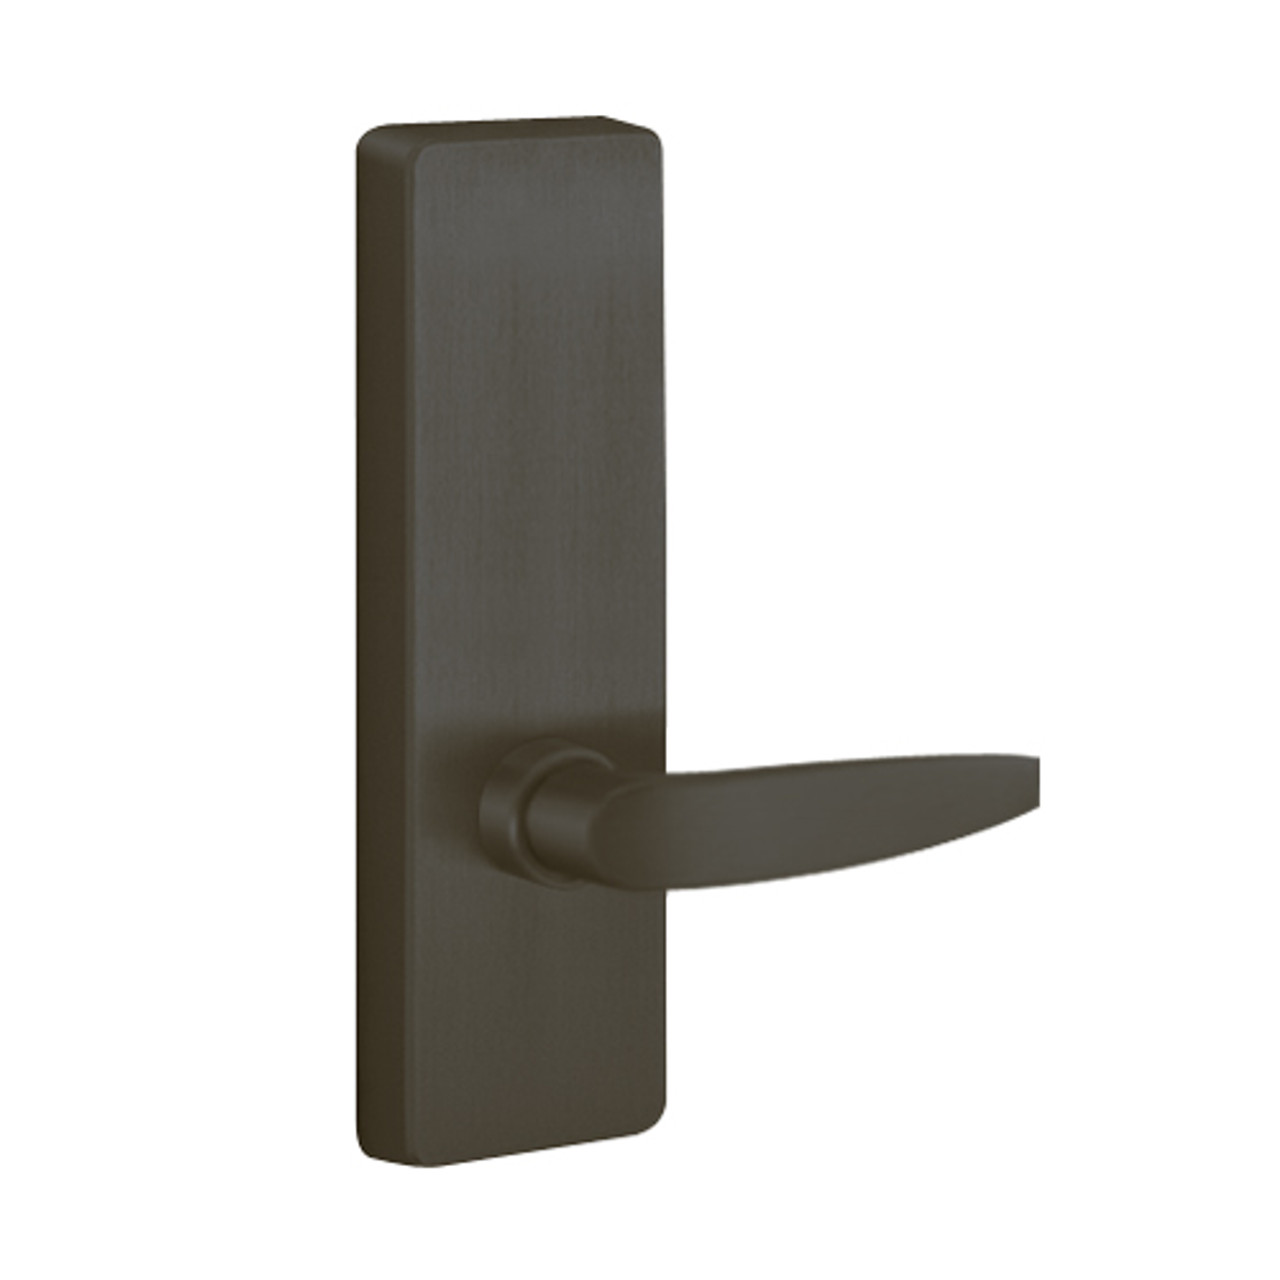 4902B-613-RHR PHI Dummy Trim with B Lever Design for Apex and Olympian Series Exit Device in Oil Rubbed Bronze Finish